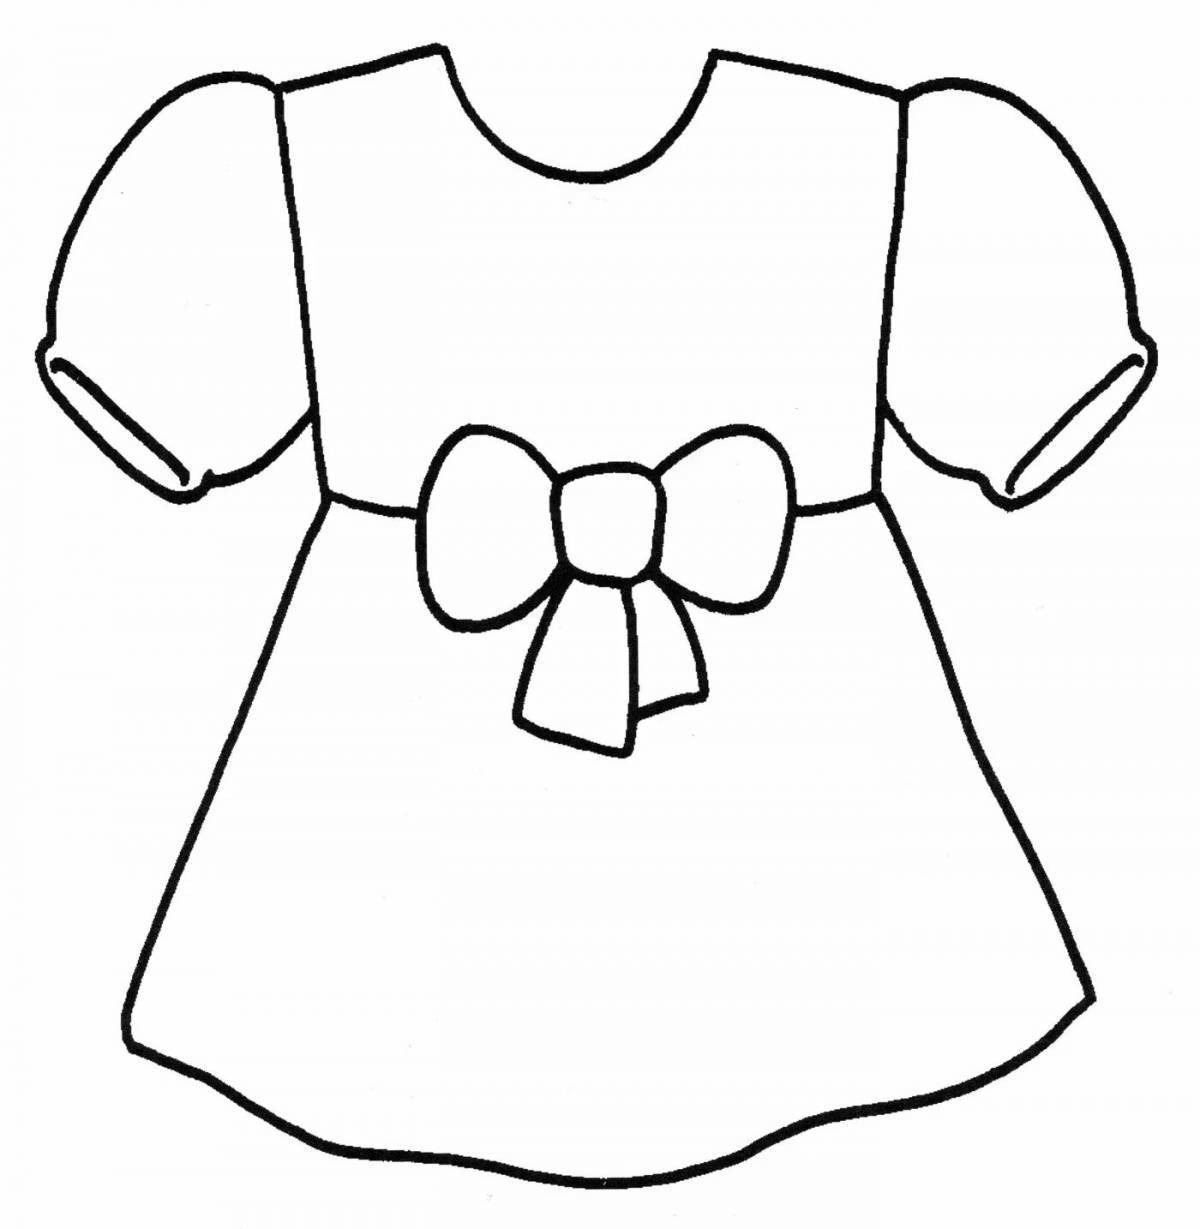 Coloring page elegant dress for children 4-5 years old